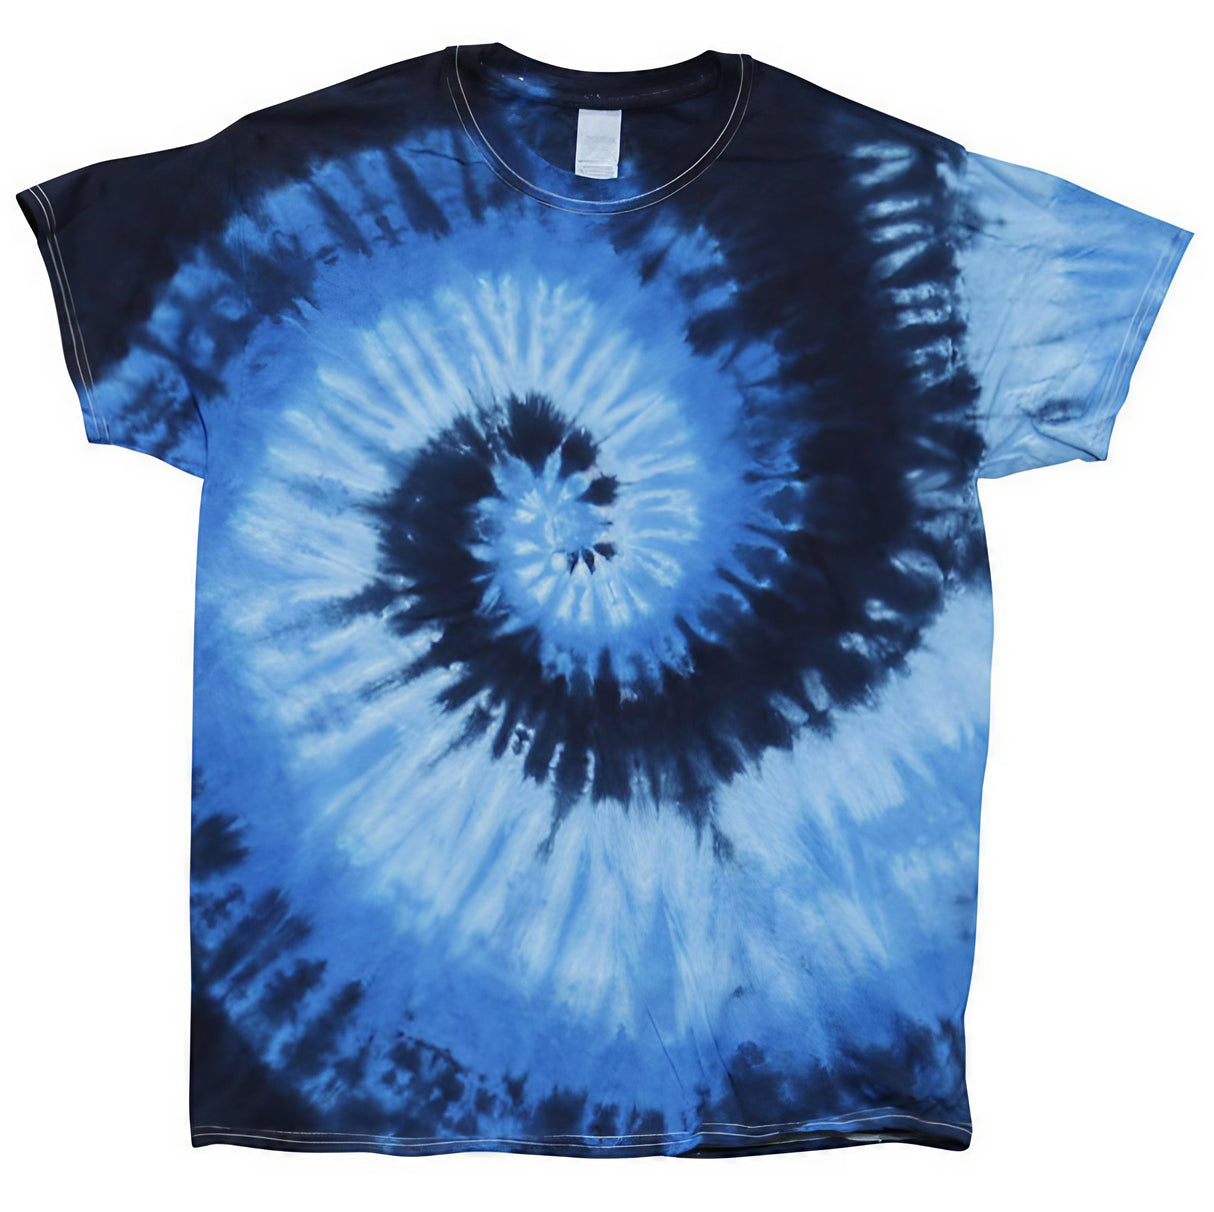 Colortone Tie-Dye T-Shirt in Blue Ocean pattern, unisex cotton apparel, front view on white background